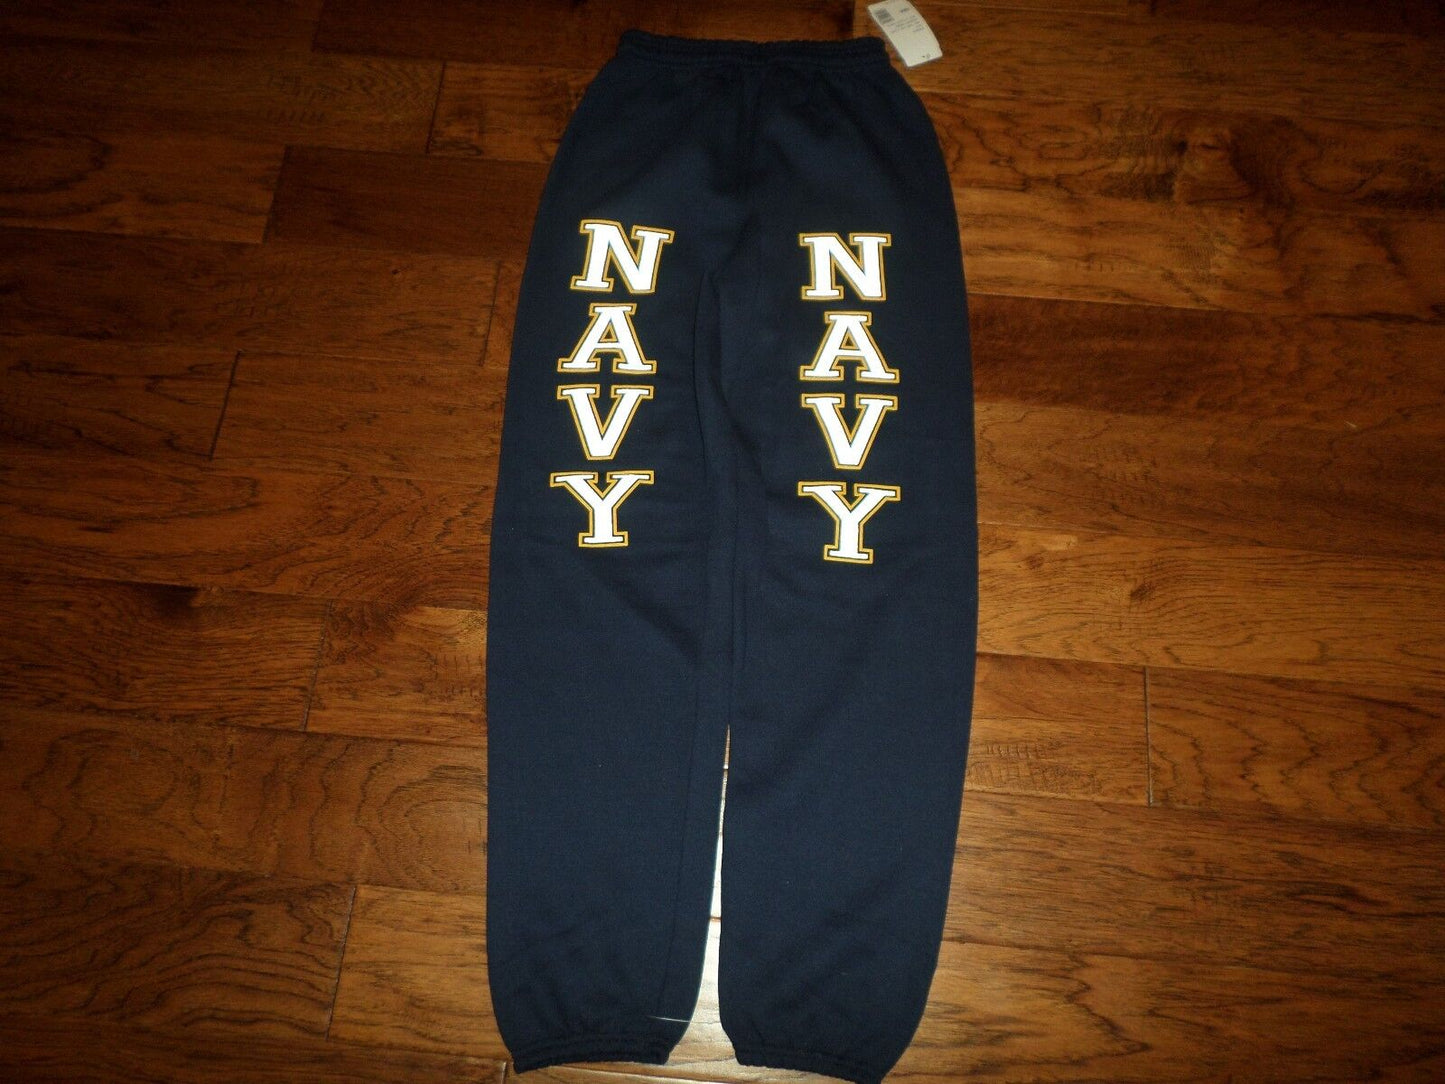 U.S MILITARY NAVY DARK BLUE SWEATPANTS SIZE SMALL. MADE IN THE U.S.A  SOFFE